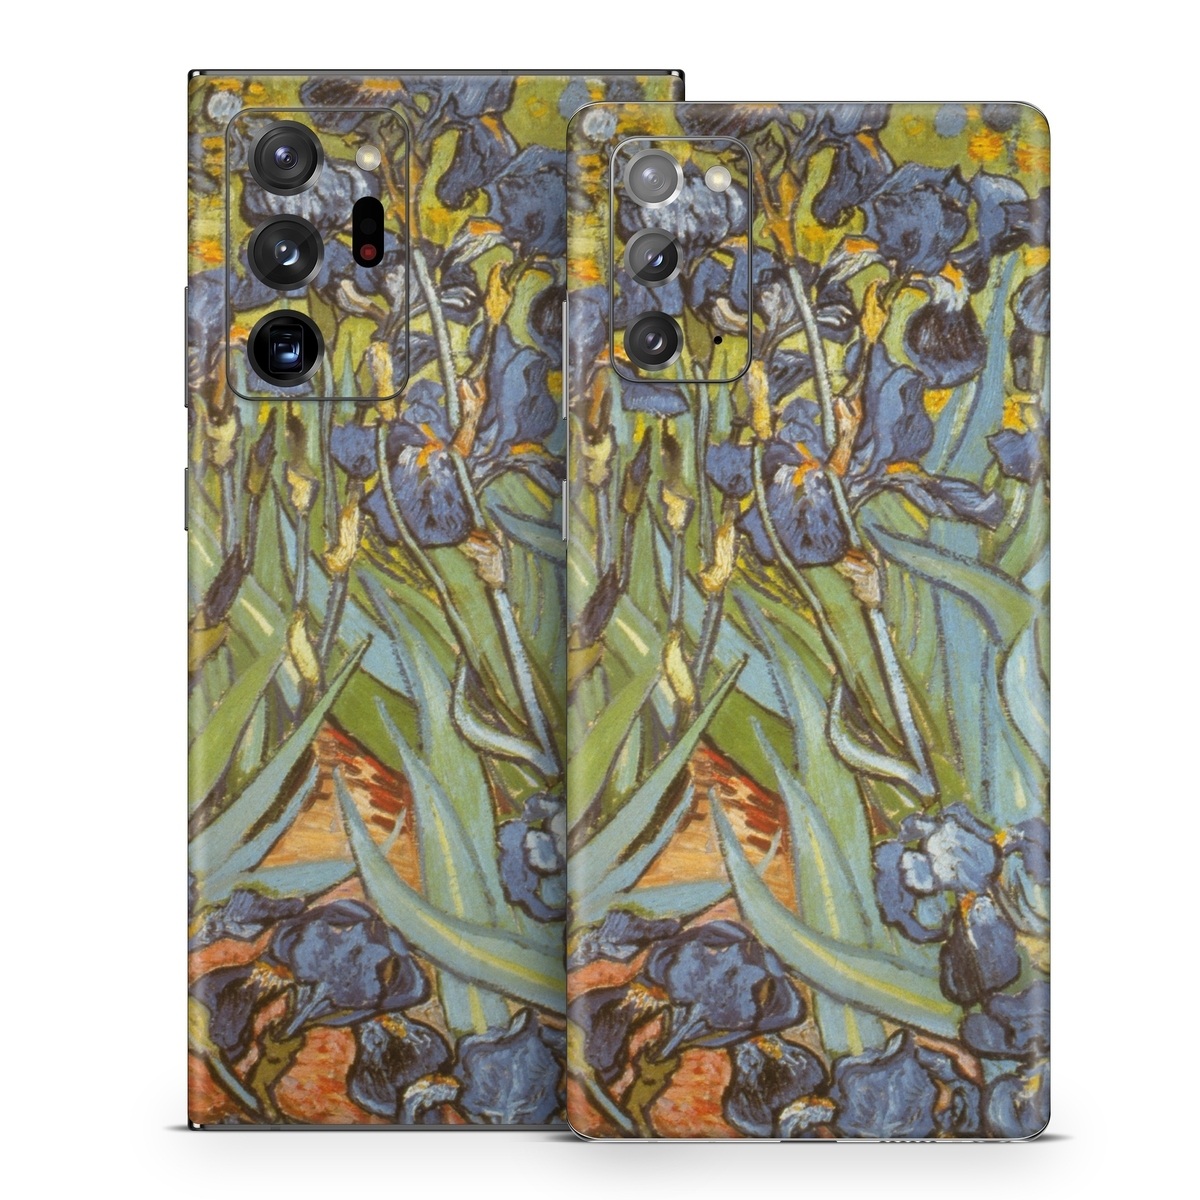 Samsung Galaxy Note 20 Series Skin design of Painting, Plant, Art, Flower, Iris, Modern art, Perennial plant, with gray, green, black, red, blue colors